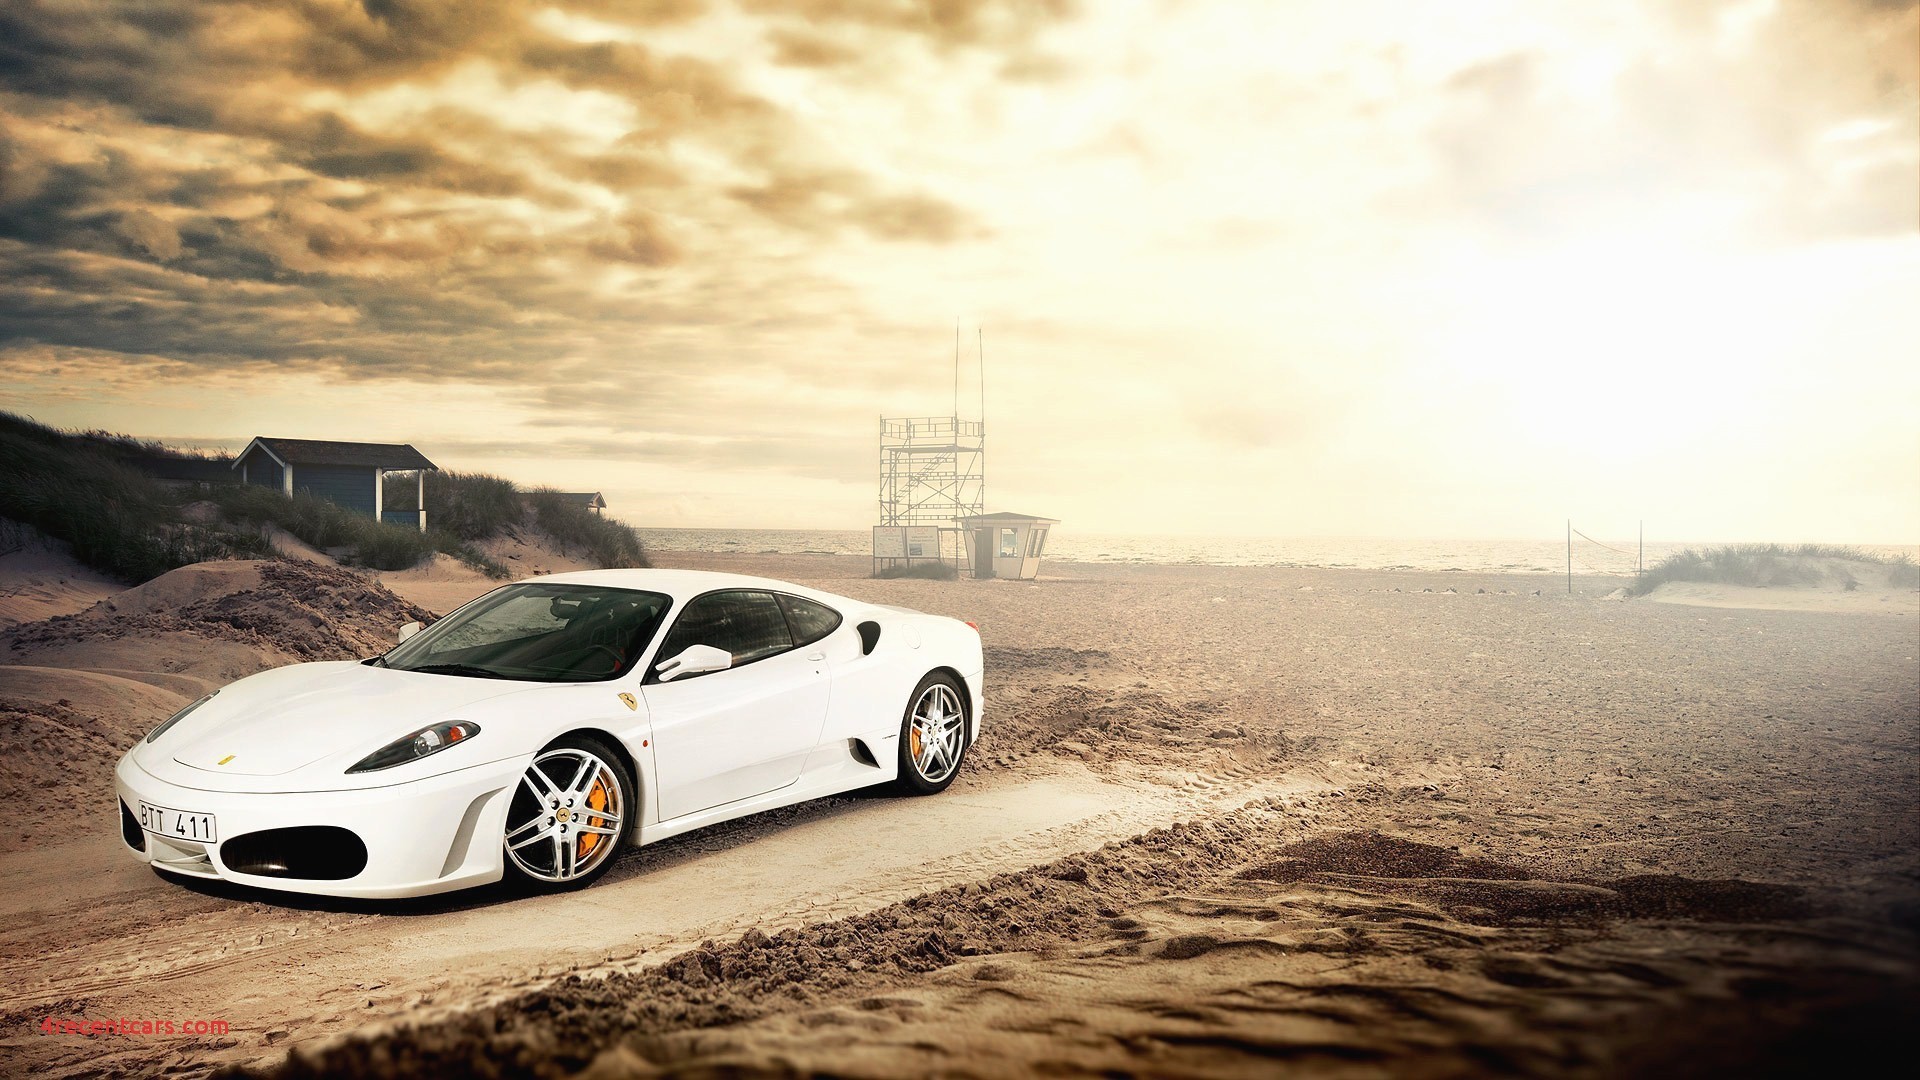 1920x1080, Nice Cars Wallpapers Awesome Car Wallpapers - Ferrari On The Beach - HD Wallpaper 